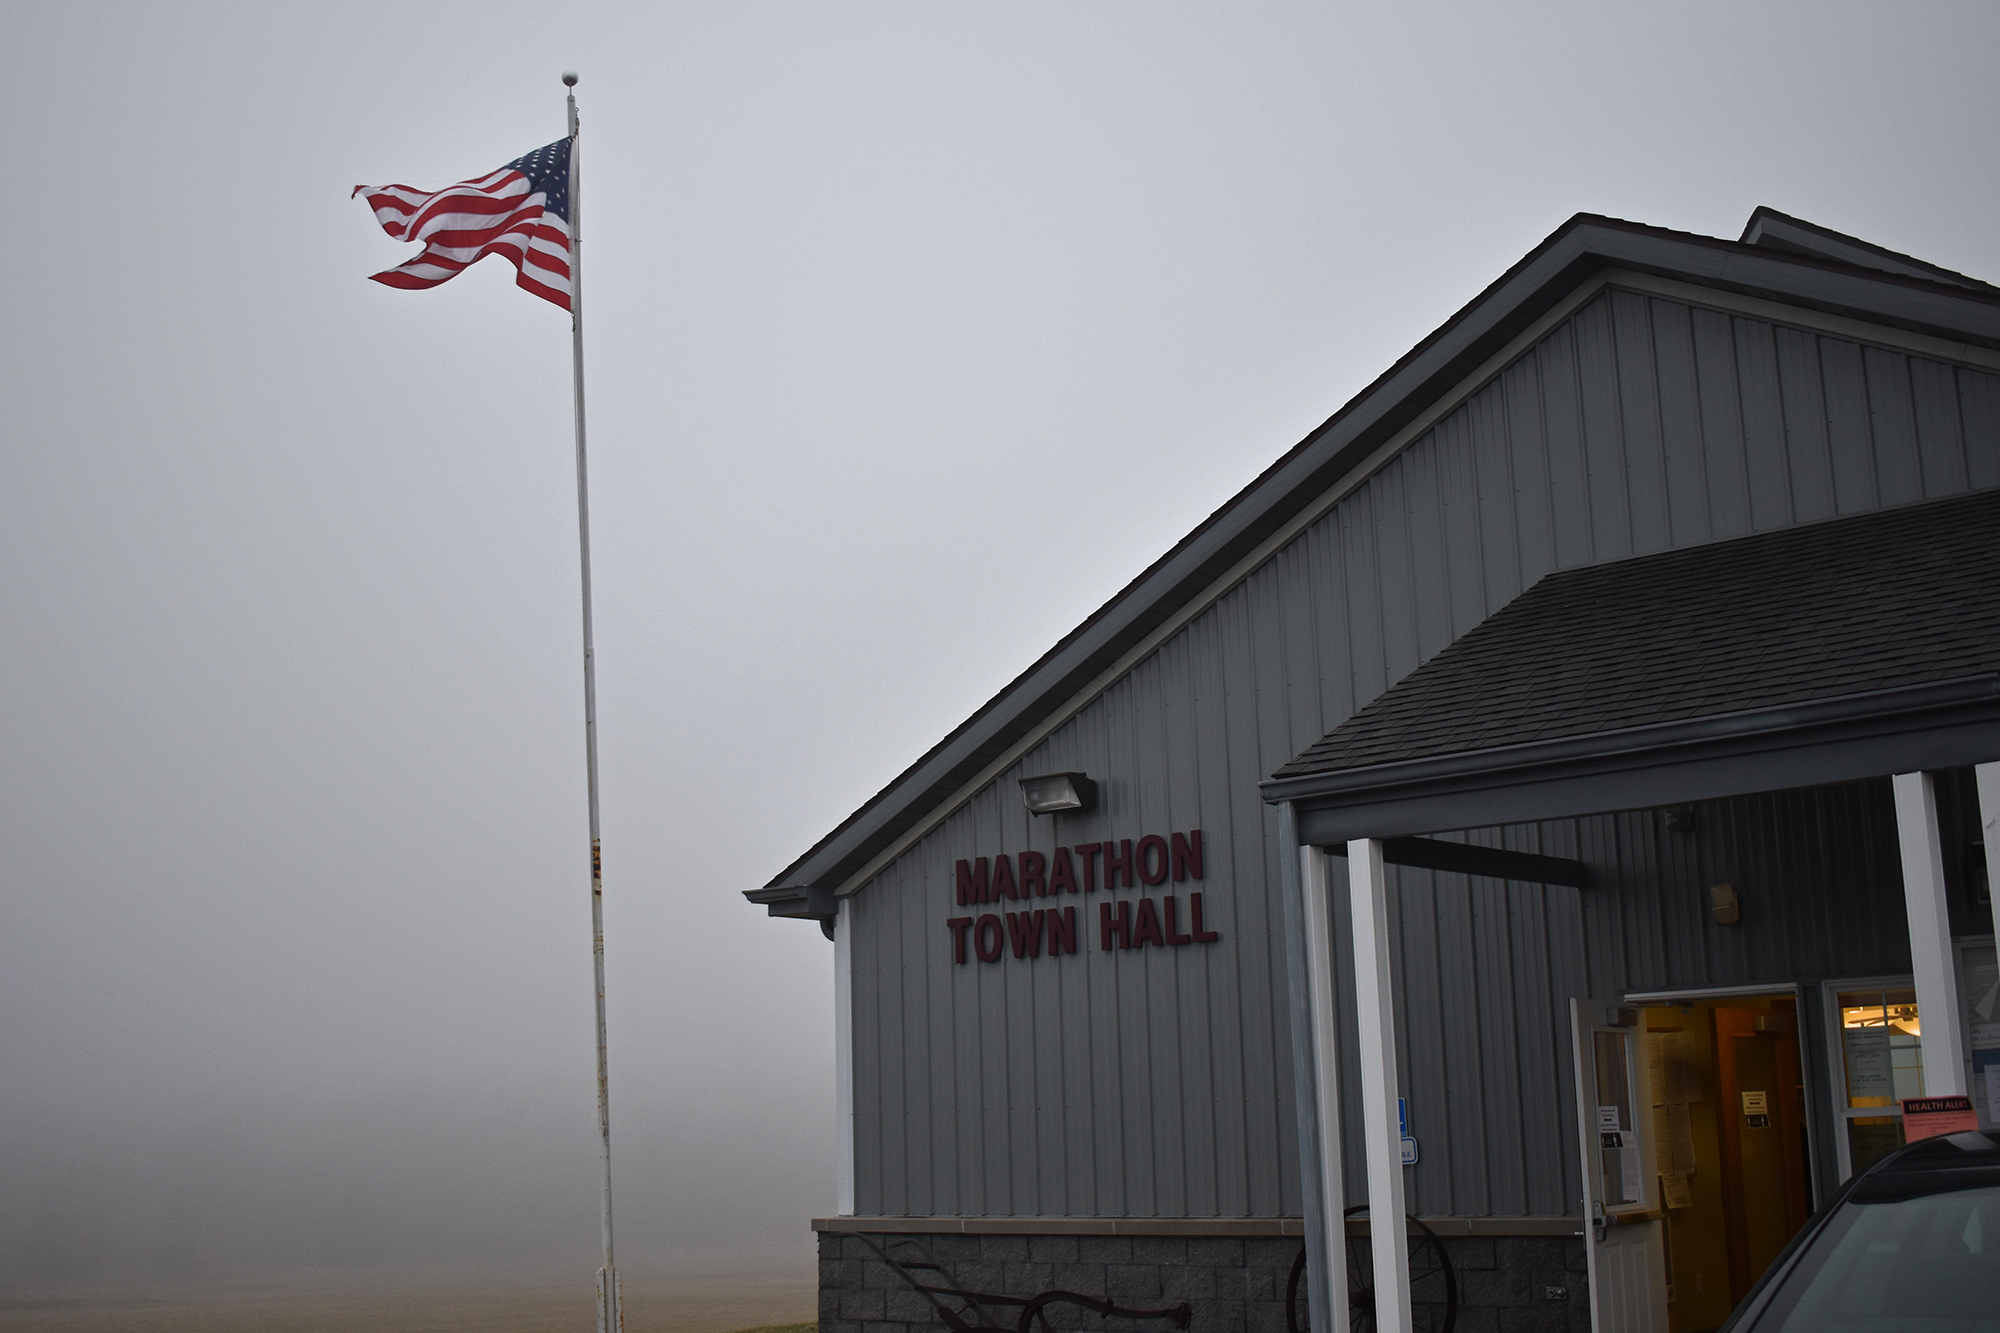 An American flag is visible in the fog outside the Marathon City Town Hall